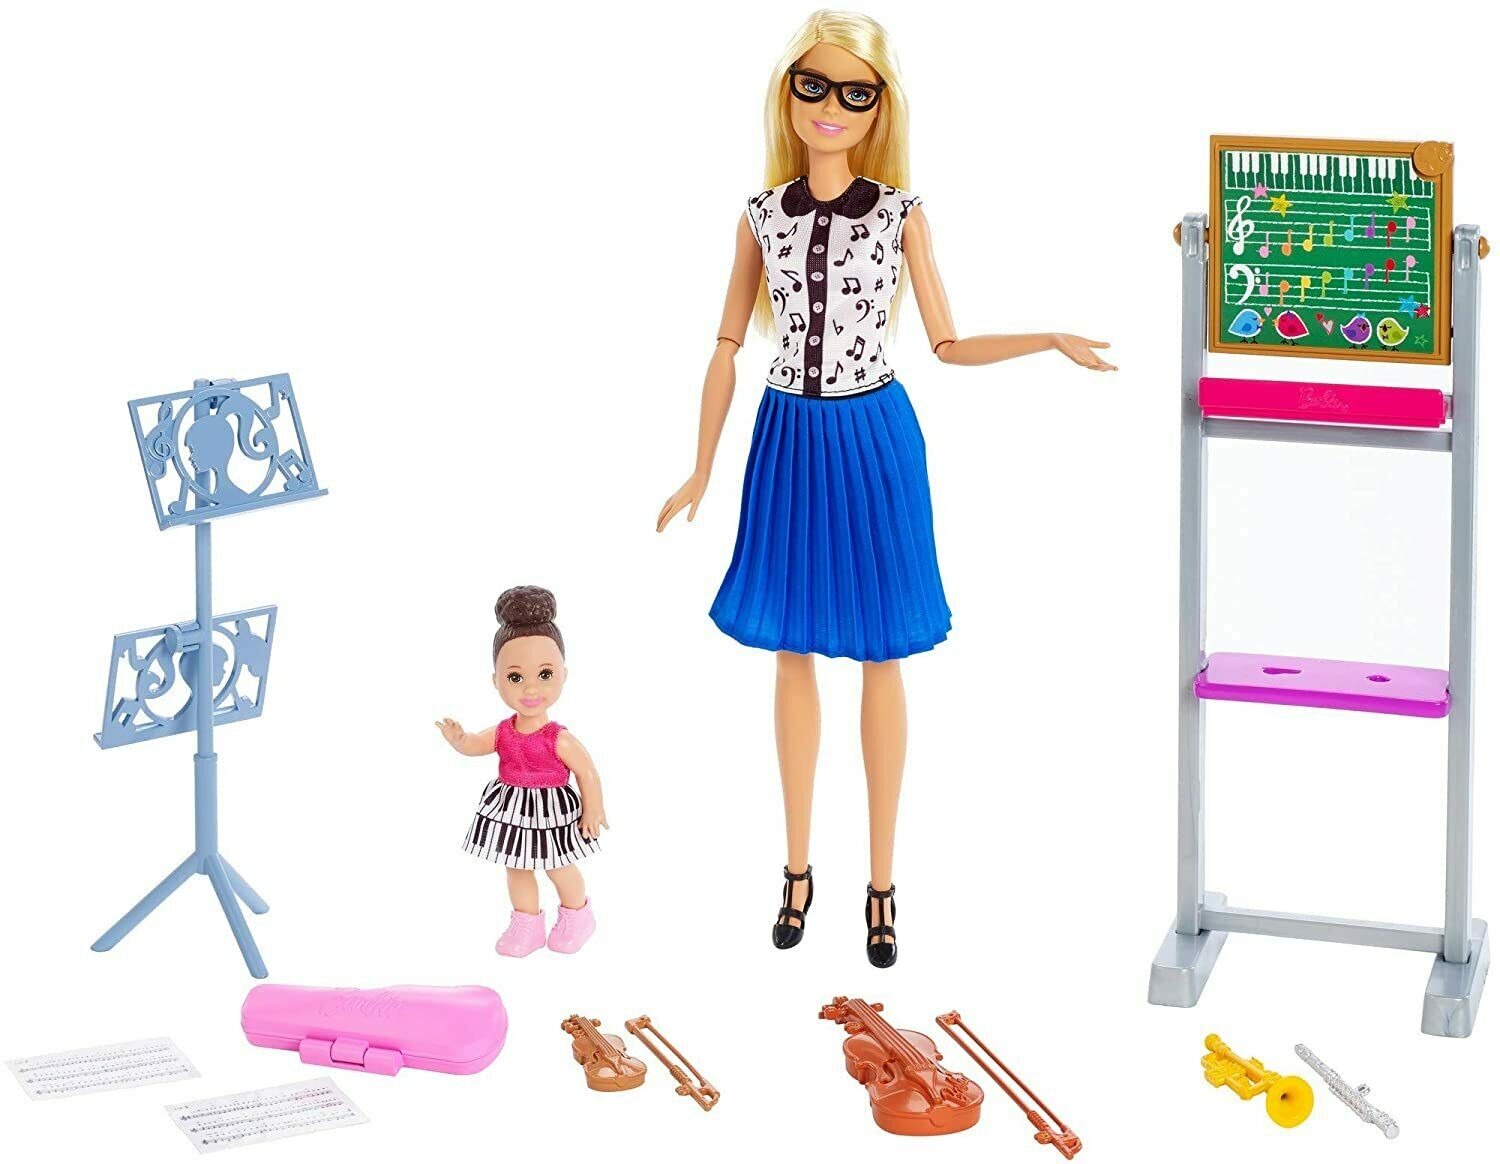 Barbie Music Teacher Doll, Blonde,career-themed Toy For 3 To 7 Year Old Kids​​​